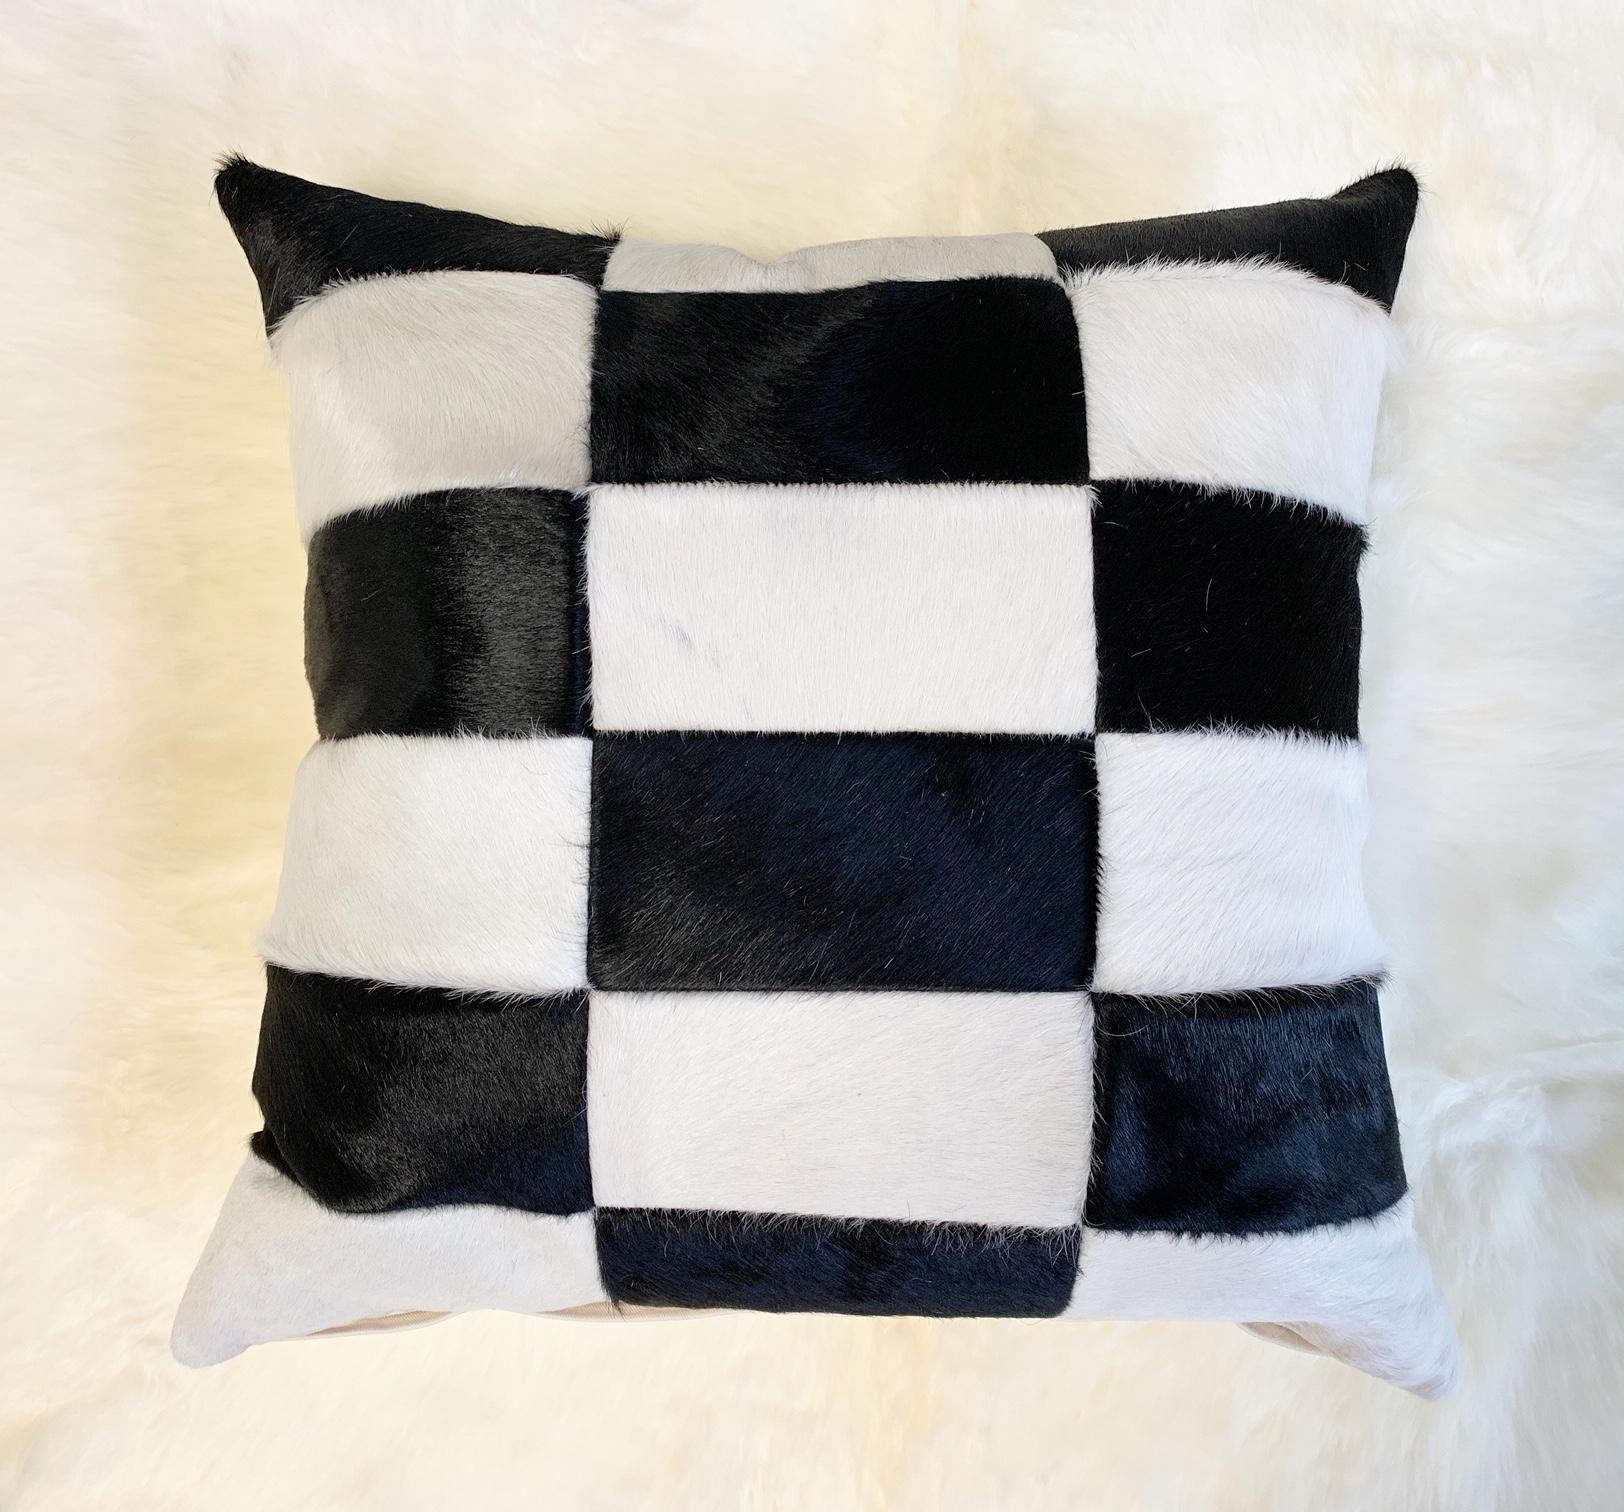 Forsyth cowhide pillows are simply the best. The most beautiful cowhides are selected, handcut, handstitched, and hand stuffed with the finest feather insert. These are finished with a cotton canvas back in ivory colorway. Each step is meticulously